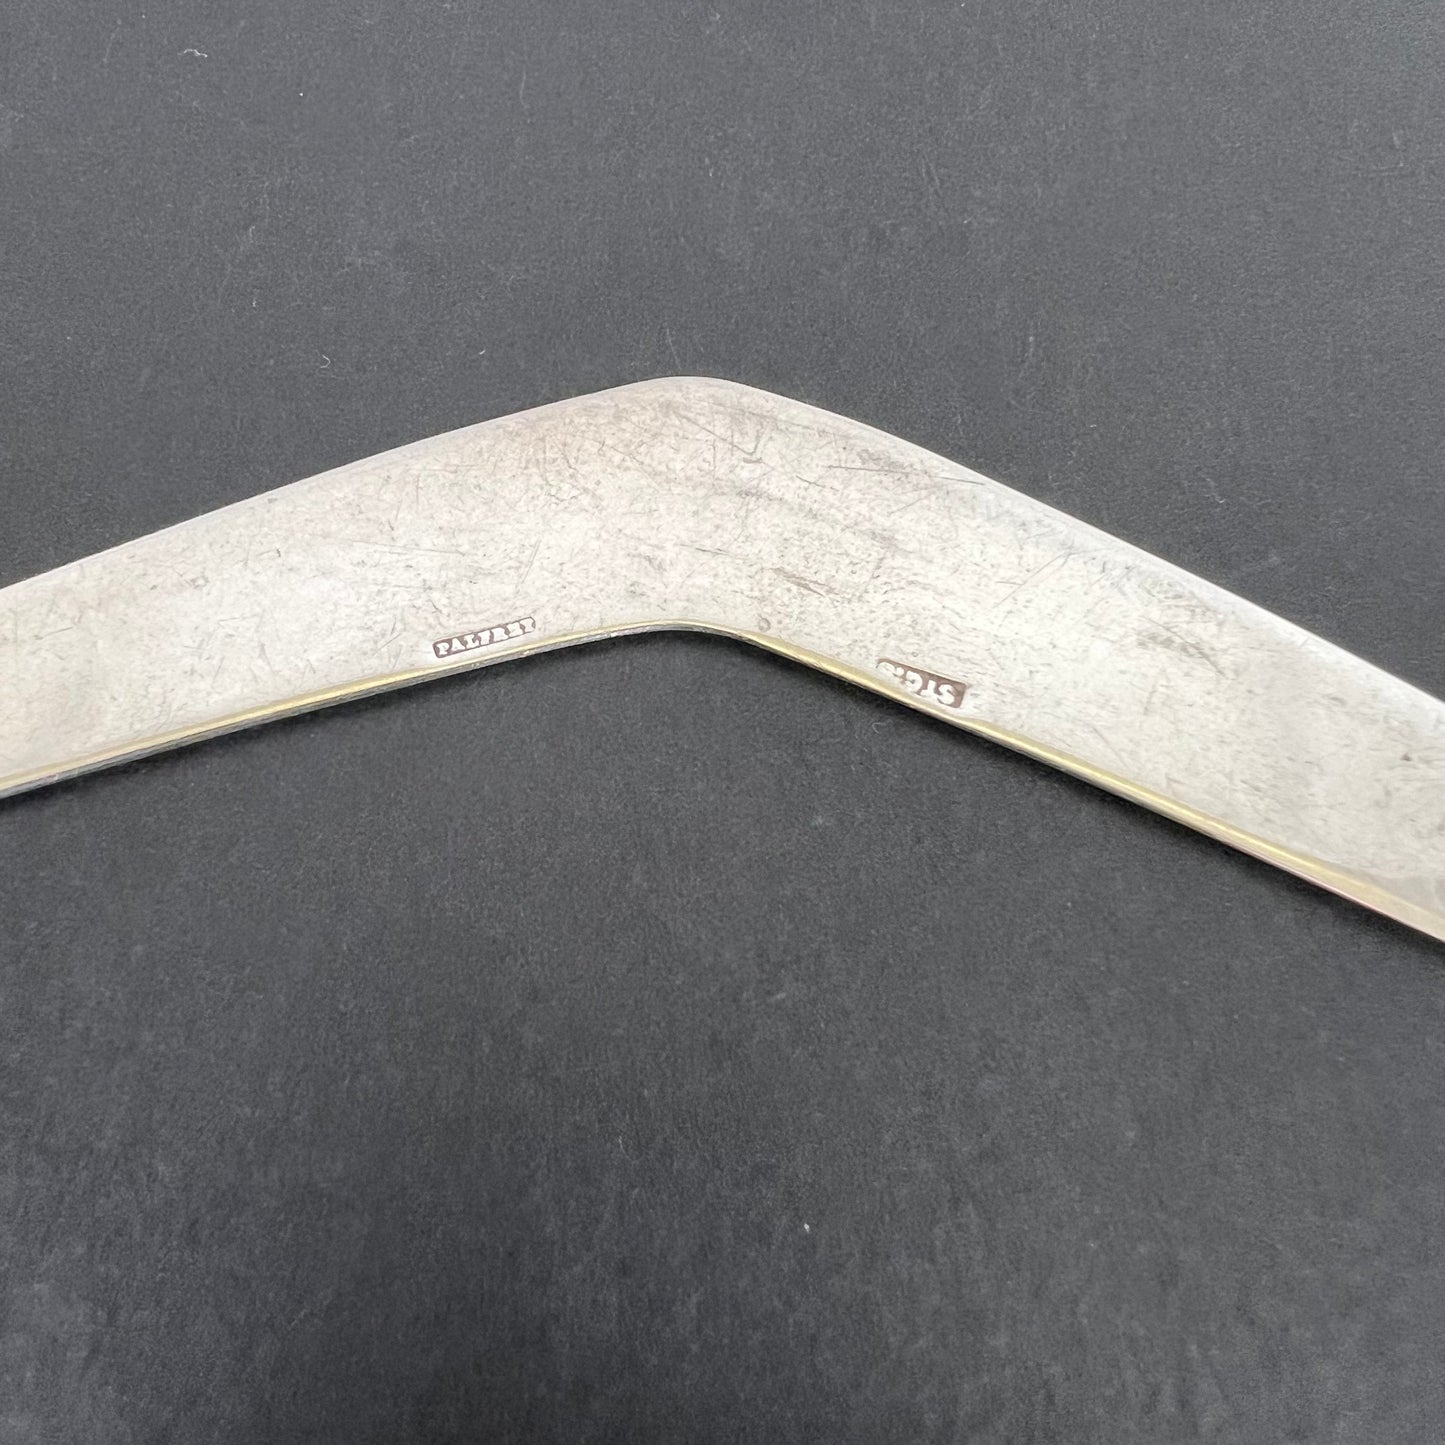 Rare early hallmarked Late Colonial to Early Federation Australian sterling silver miniature boomerang